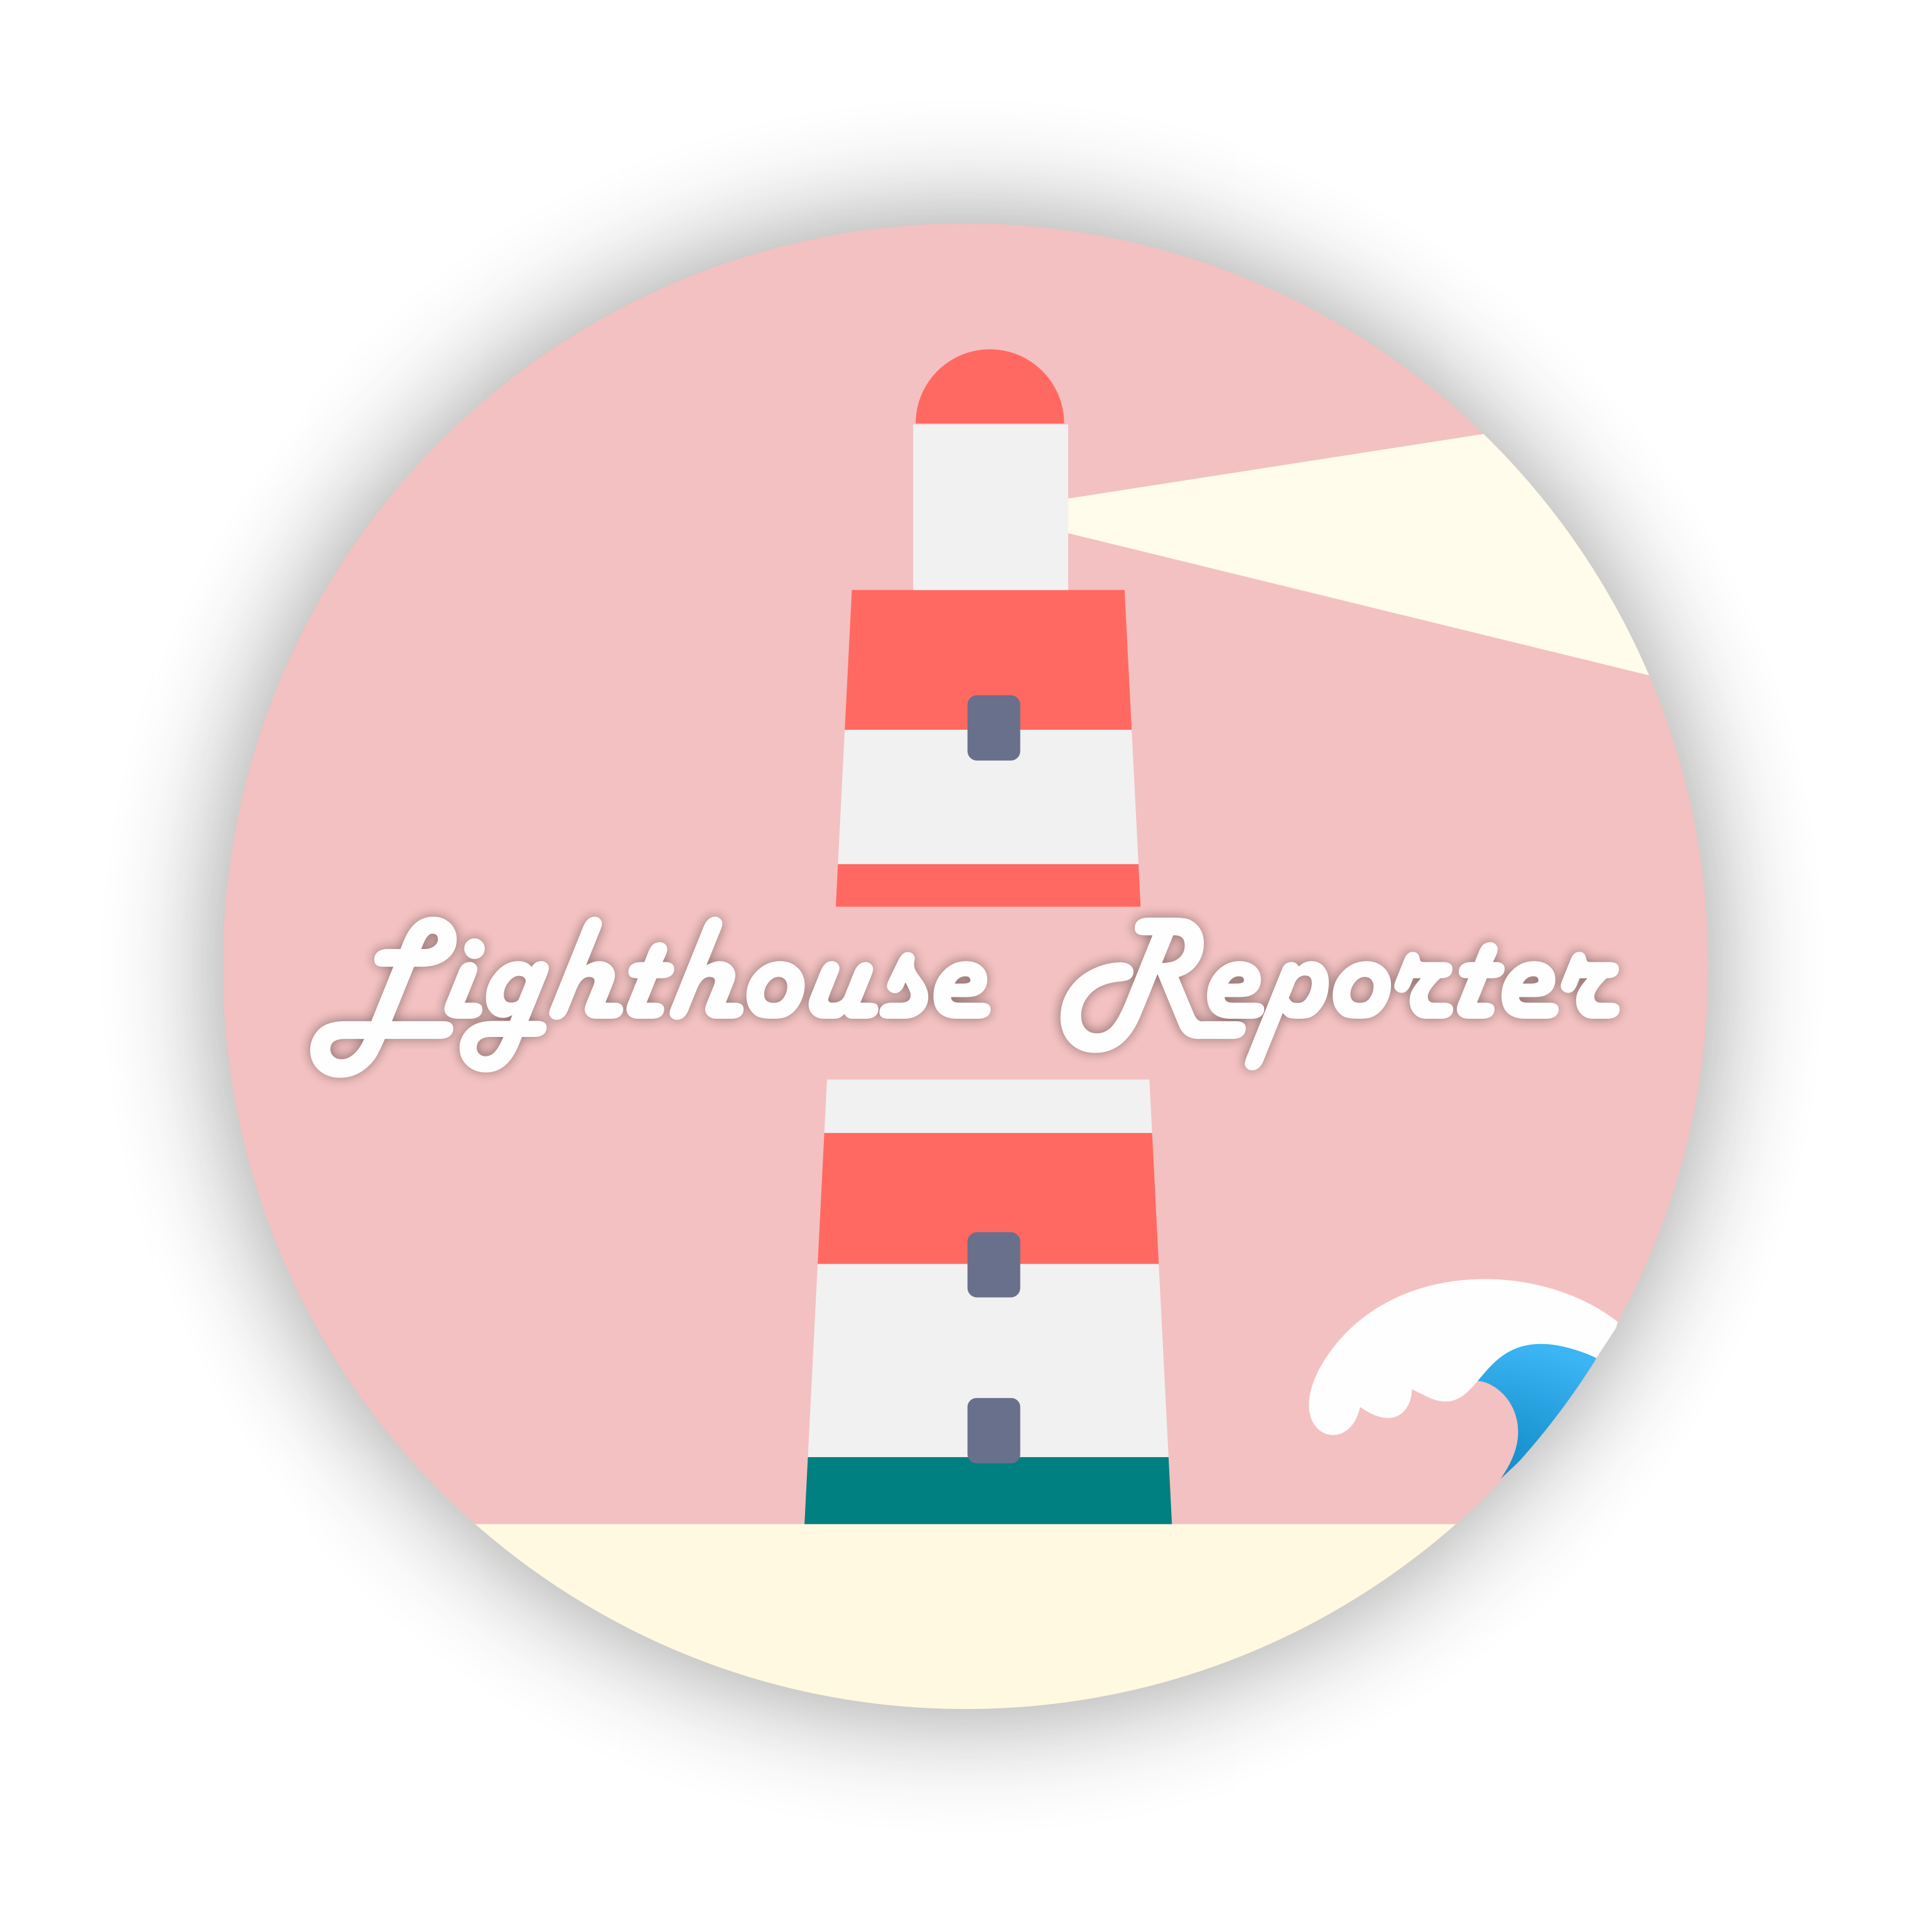 Lighthouse reporter